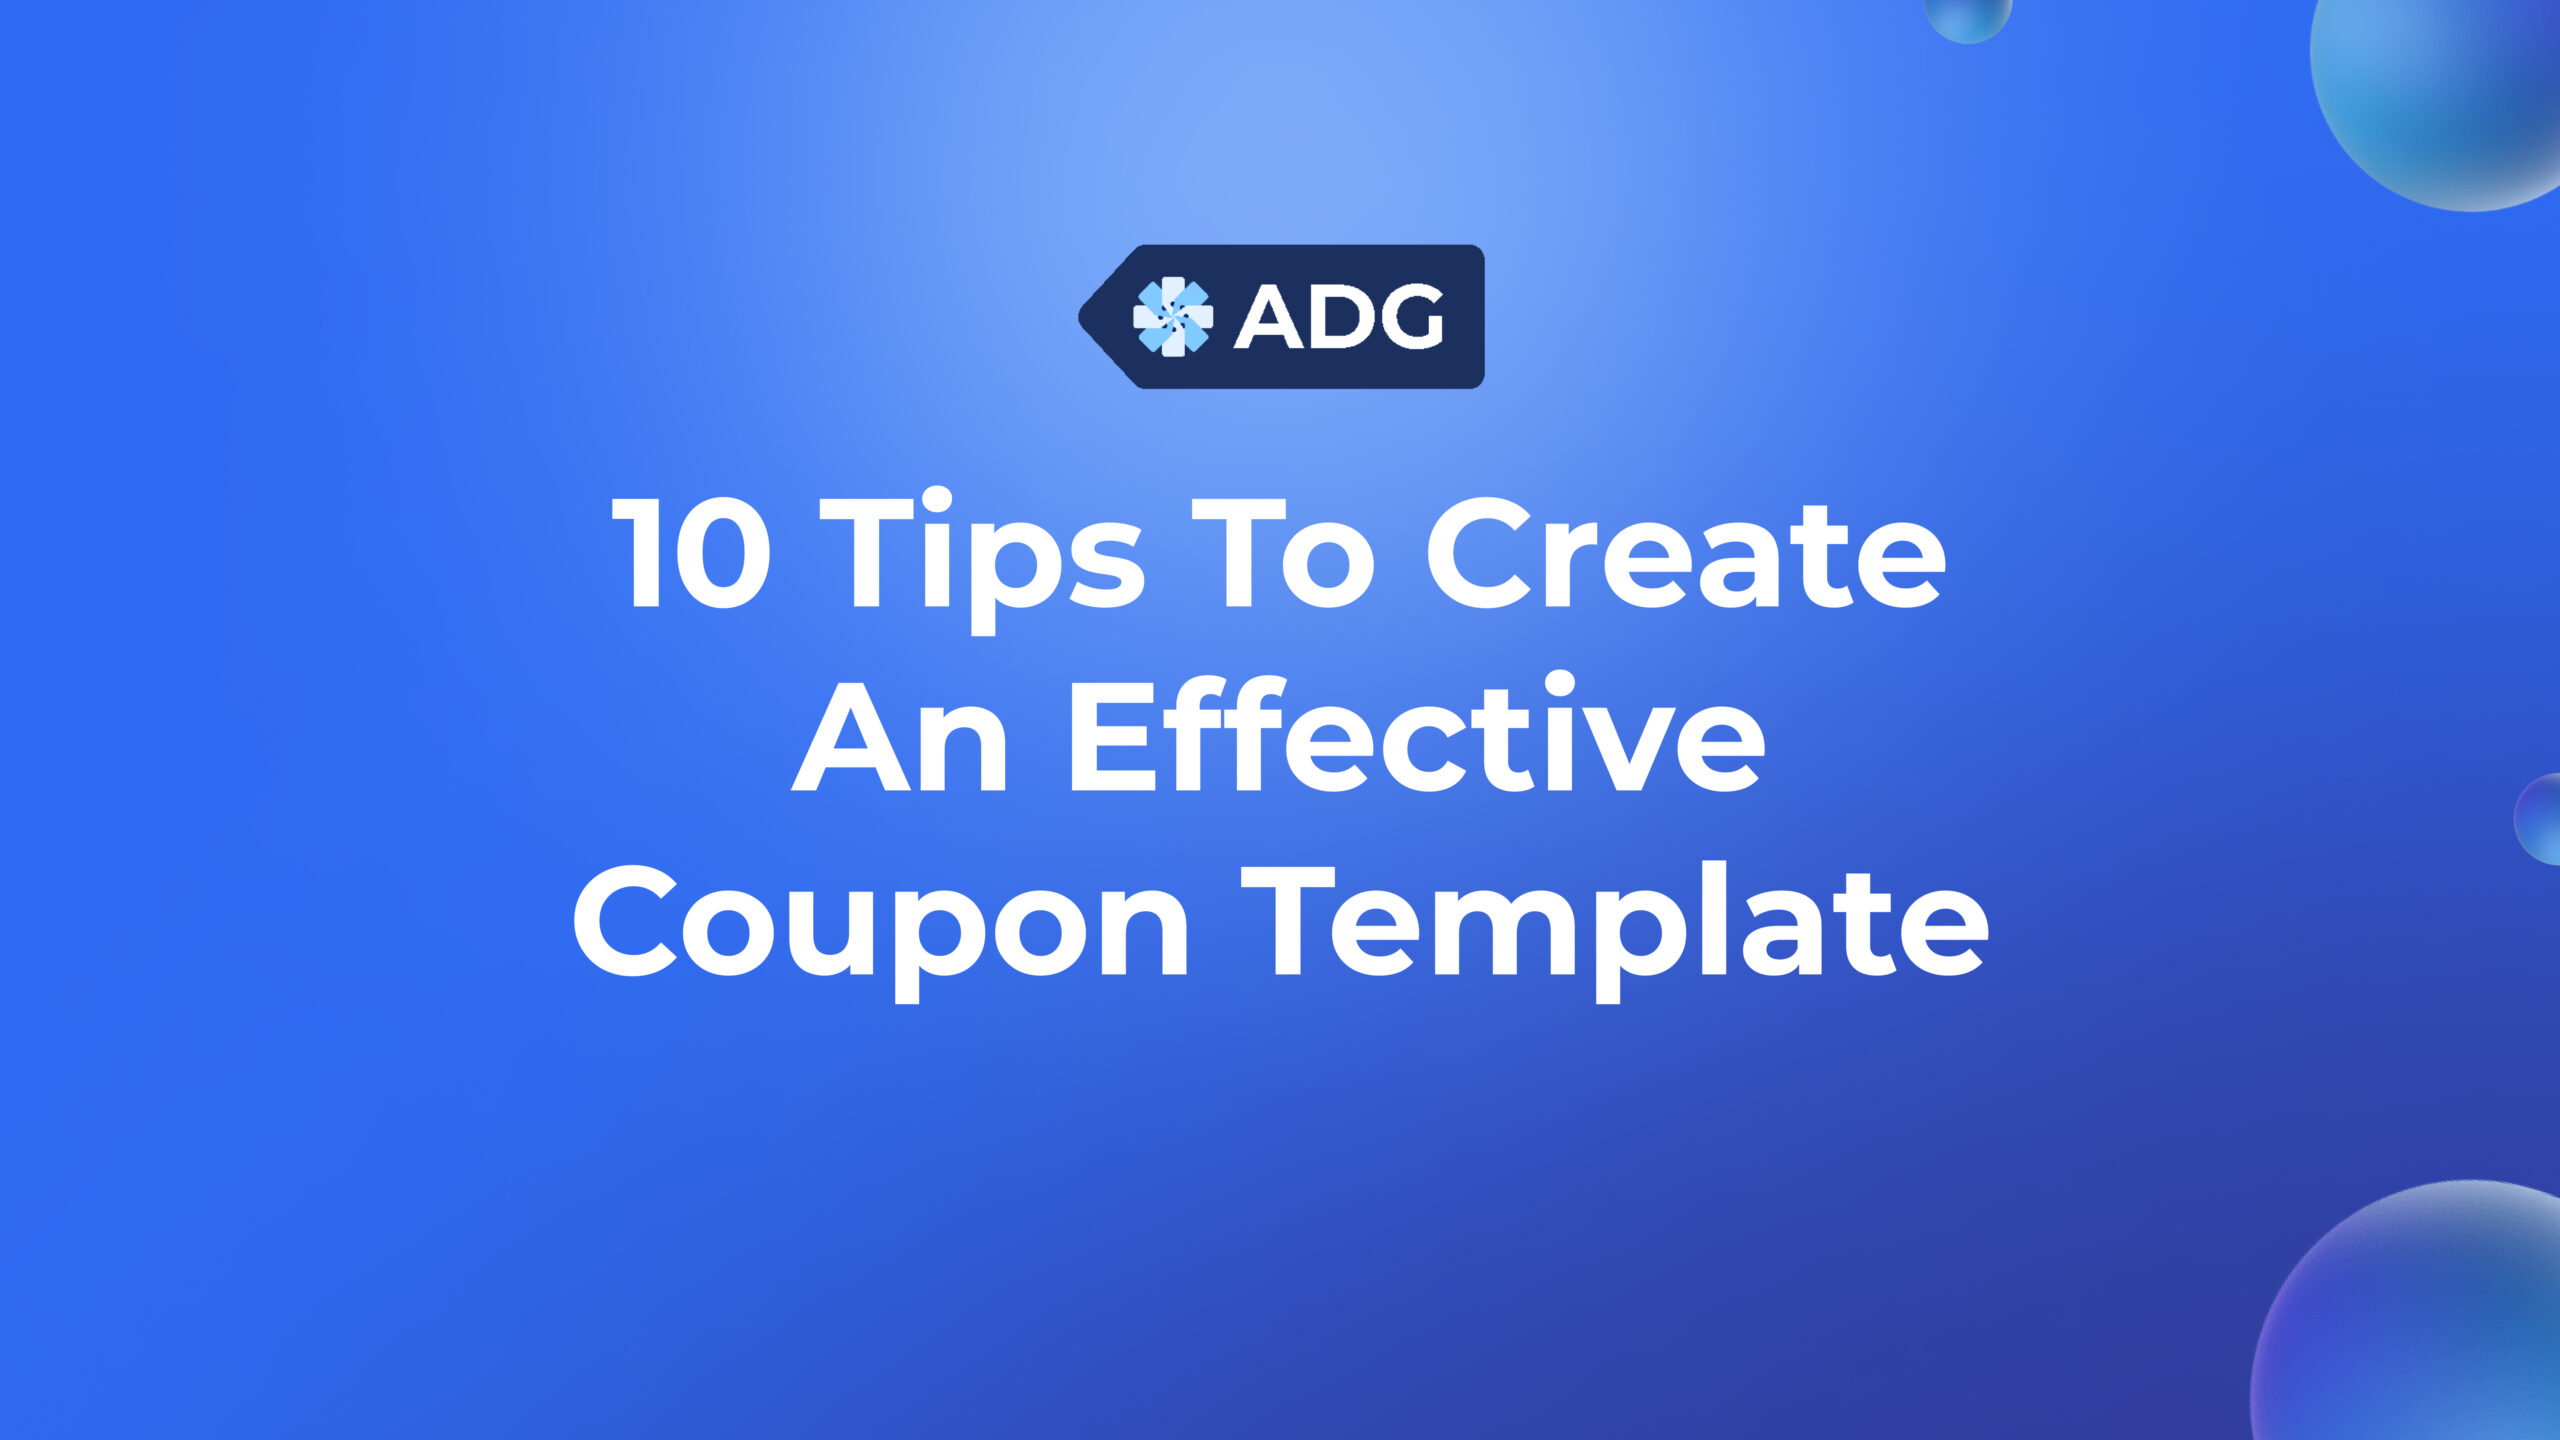 10 Tips To Create An Effective Coupon Template For Your Online Store 